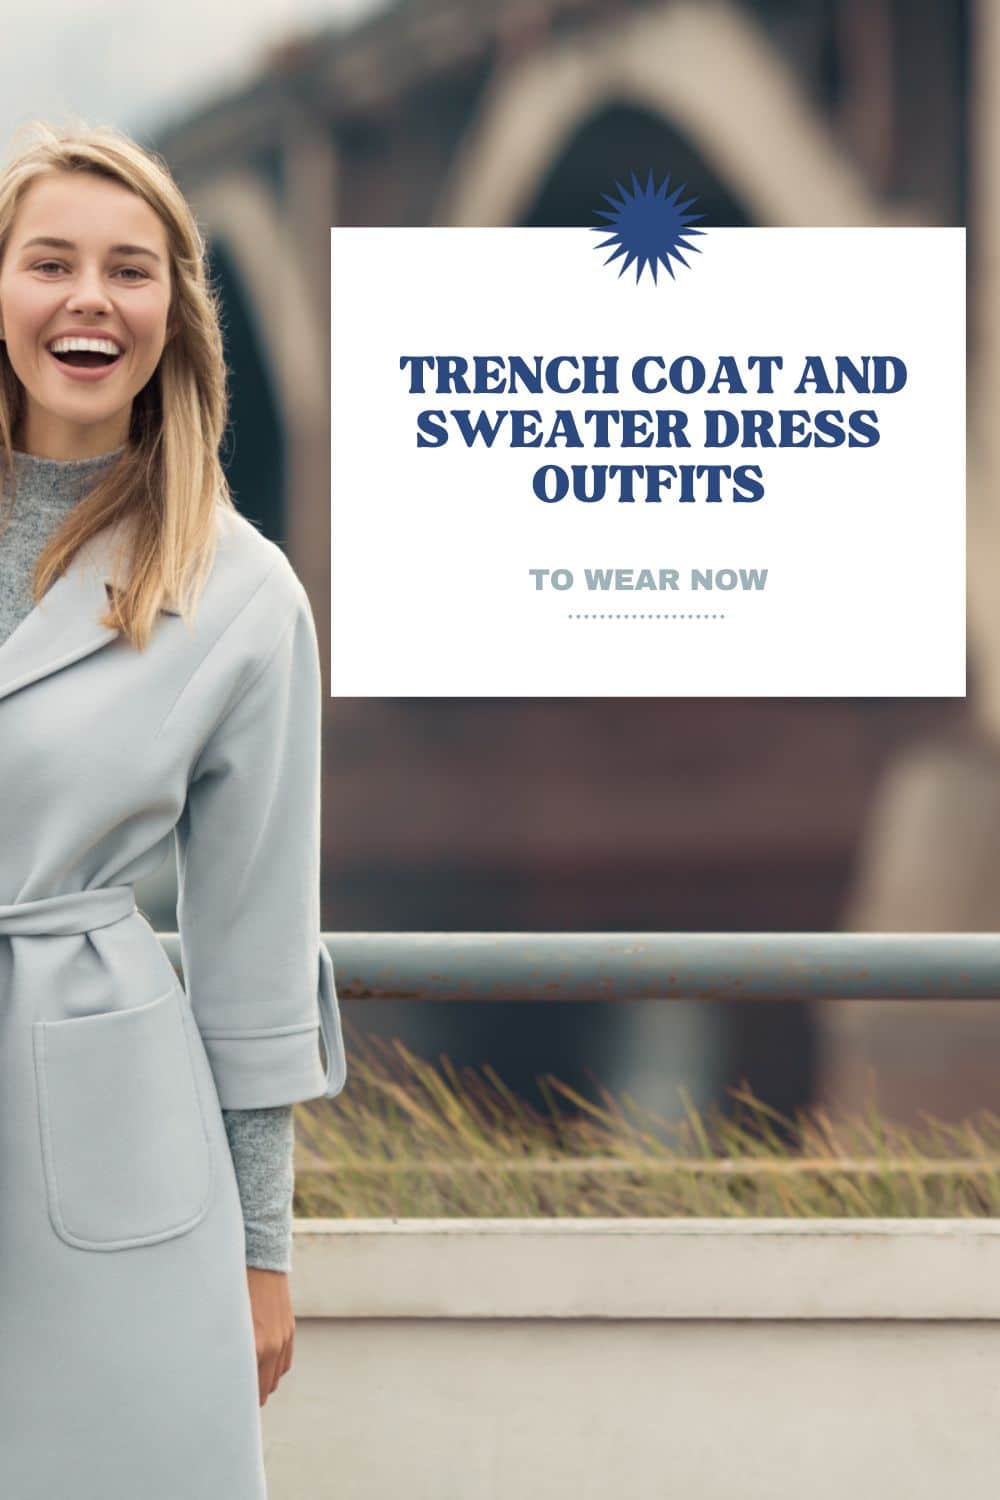 Trench coat and sweater dress outfits to wear now.